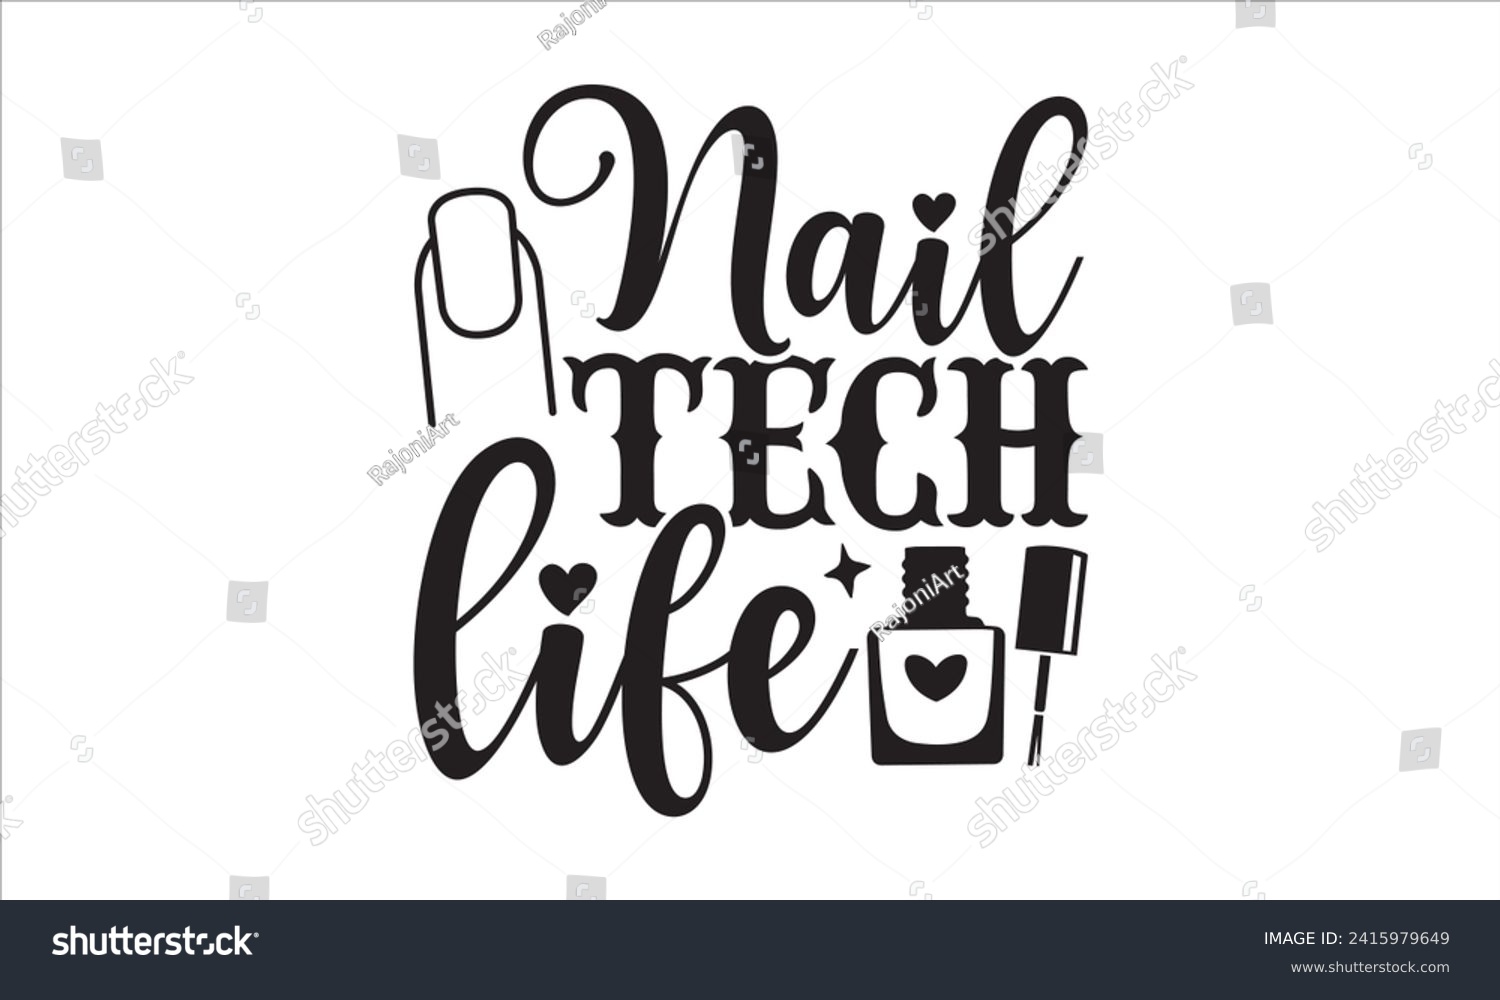 SVG of Nail tech life - Nail Tech T-Shirt Design, Modern calligraphy, Vector illustration with hand drawn lettering, posters, banners, cards, mugs, Notebooks, white background. svg